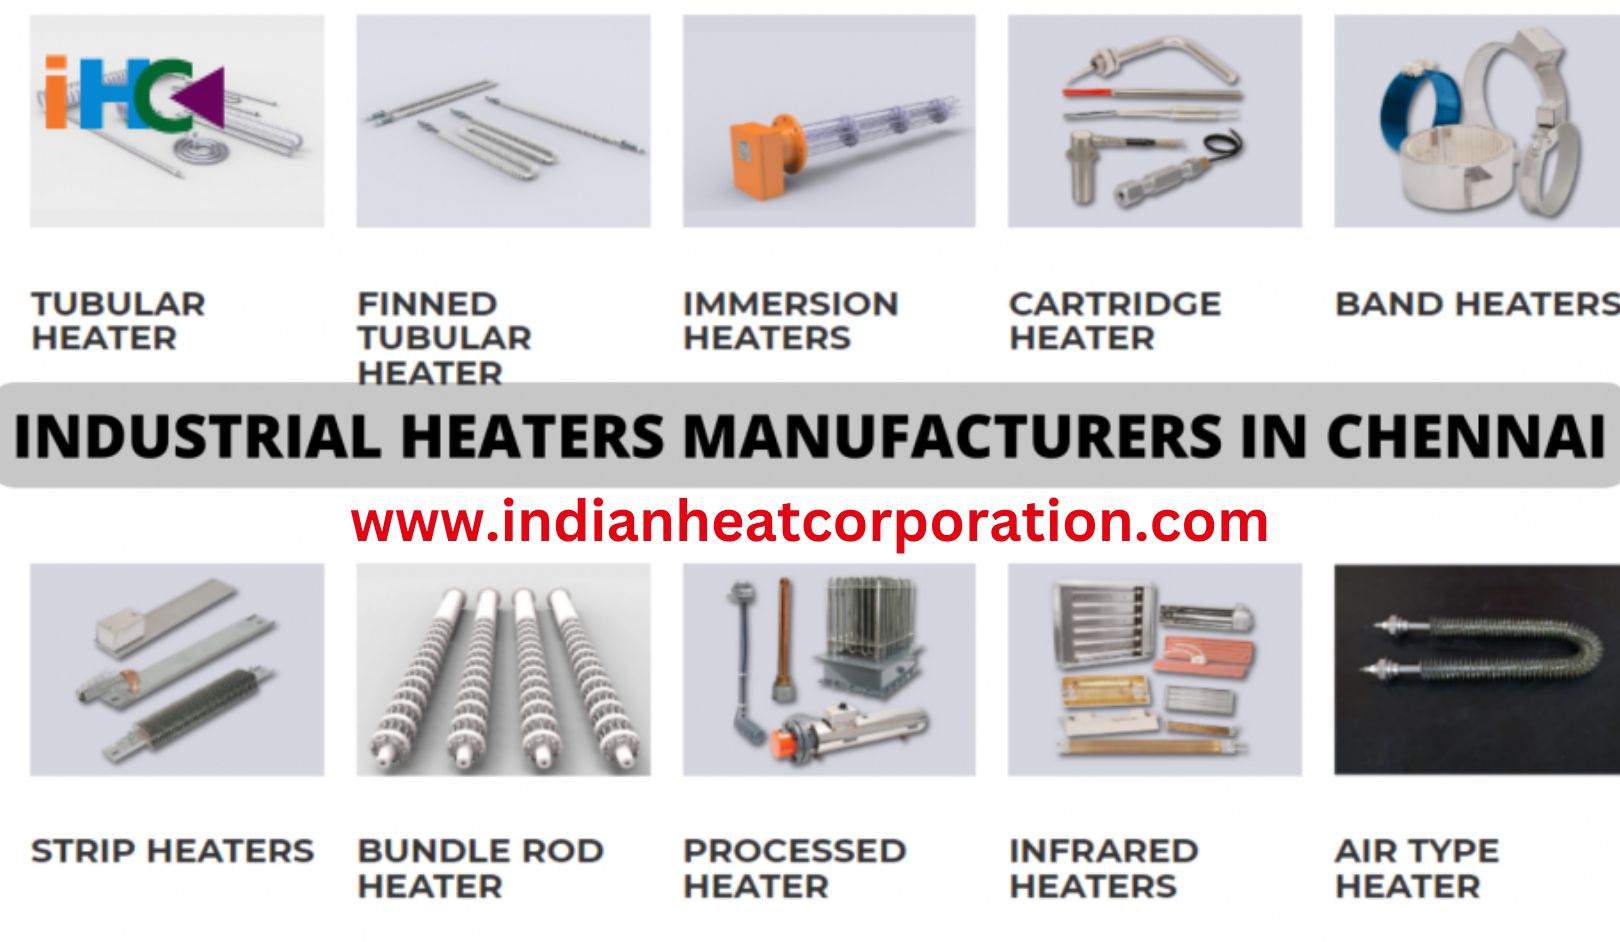 Industrial Heaters Manufacturers in Chennai